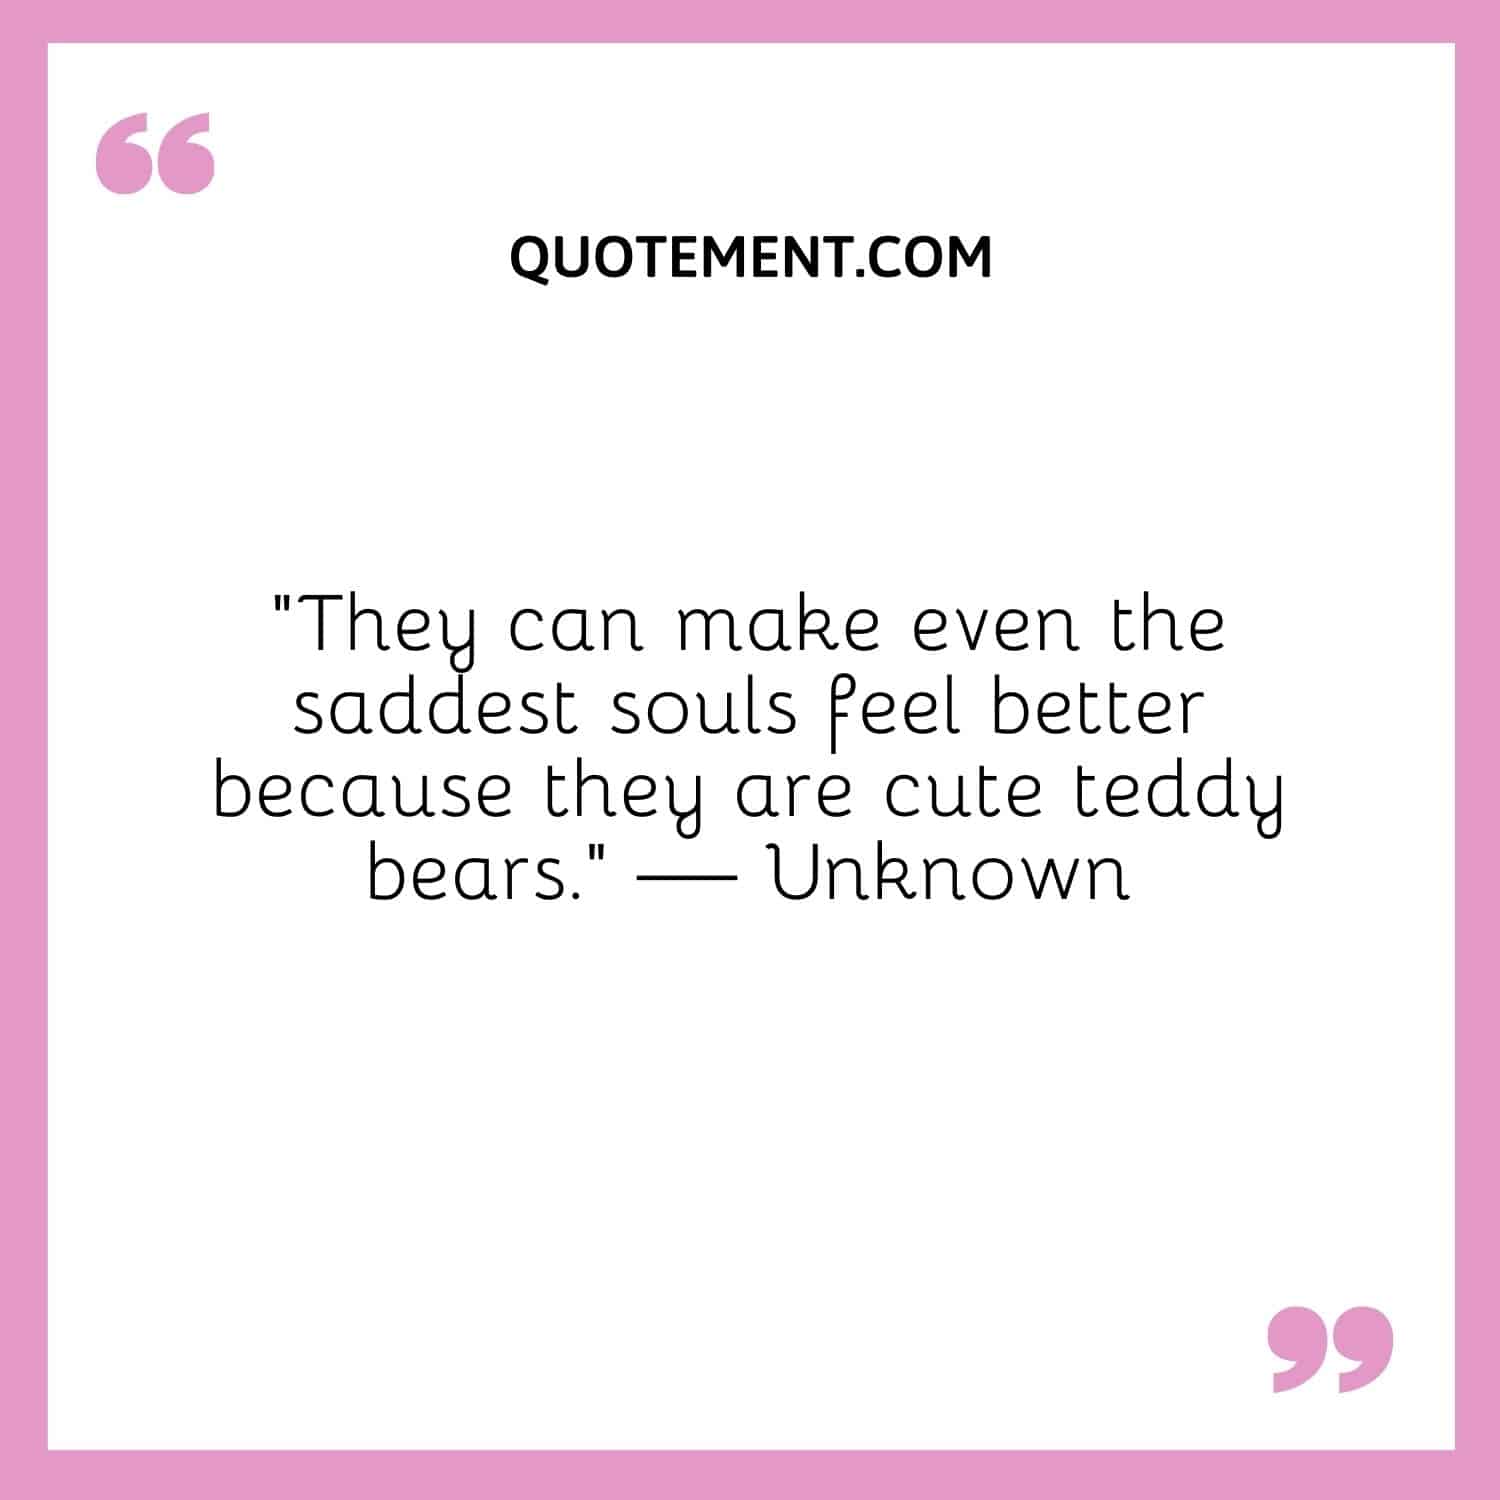 They can make even the saddest souls feel better